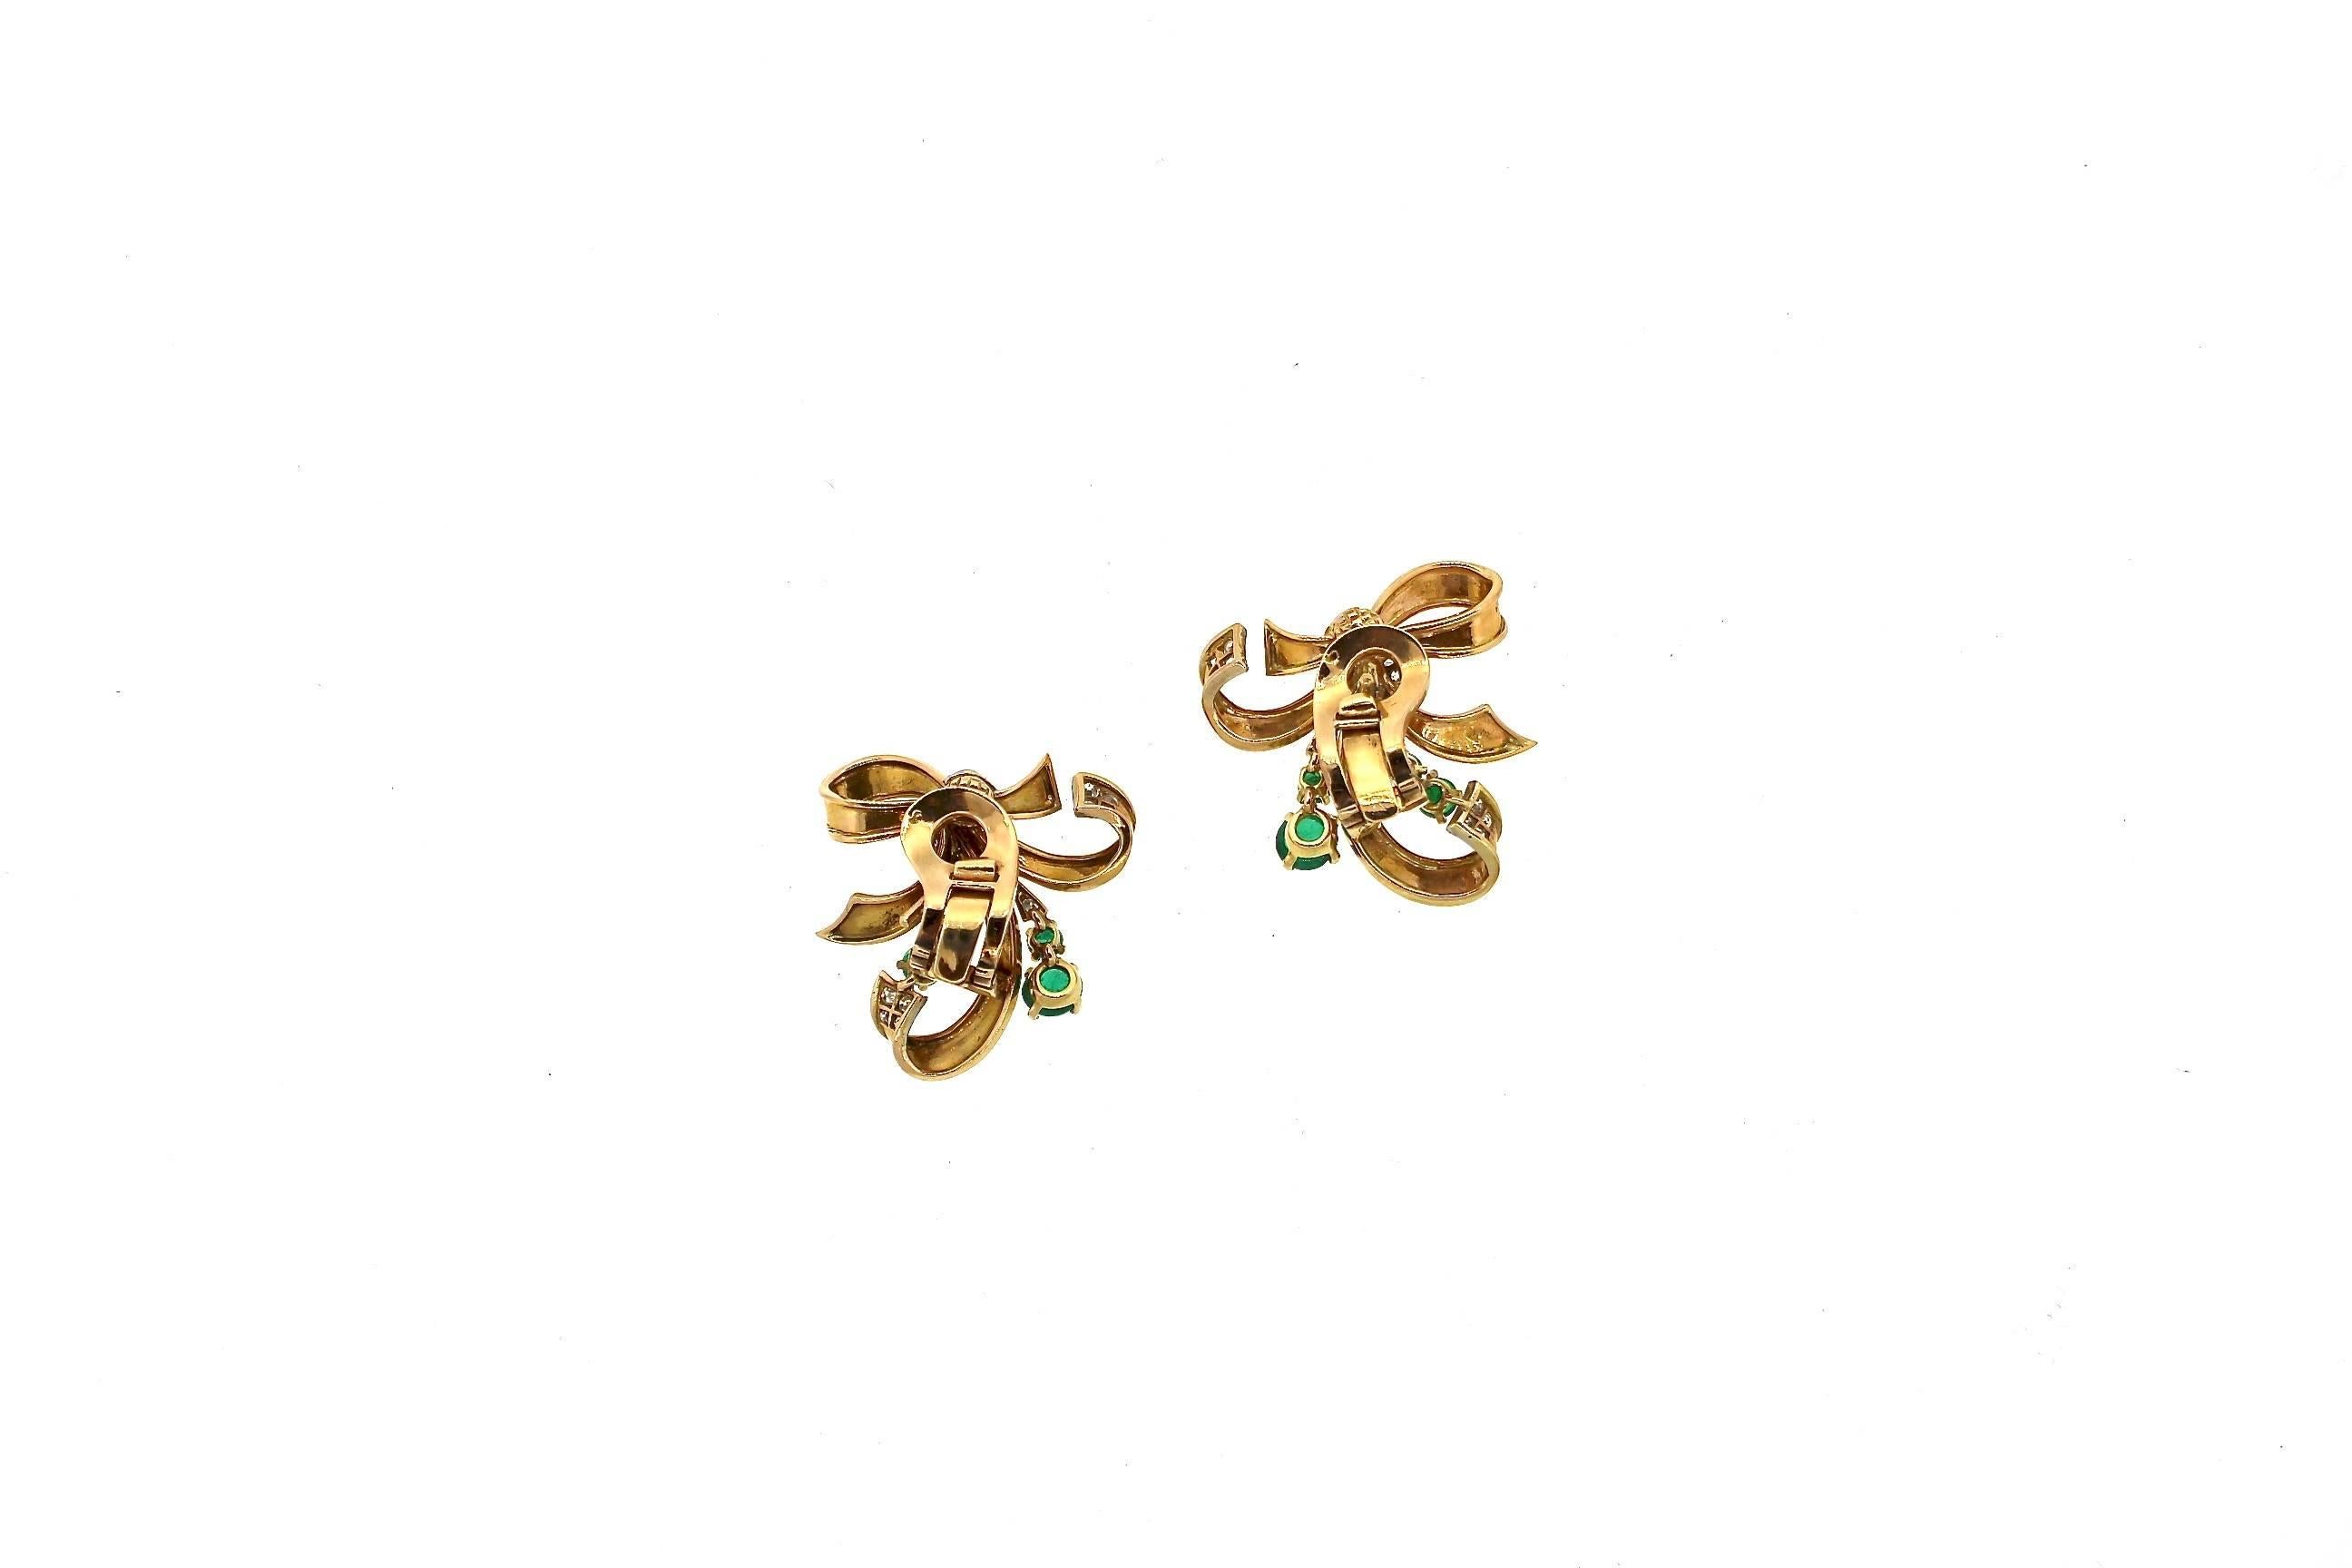 A feminine stylized ribbon earrings accented by cabochon emeralds and diamonds from the 1940s. This fun pair of earrings is quintessential Retro style, with rounded ribbon shapes and accents of bright color. The earrings have the French gold